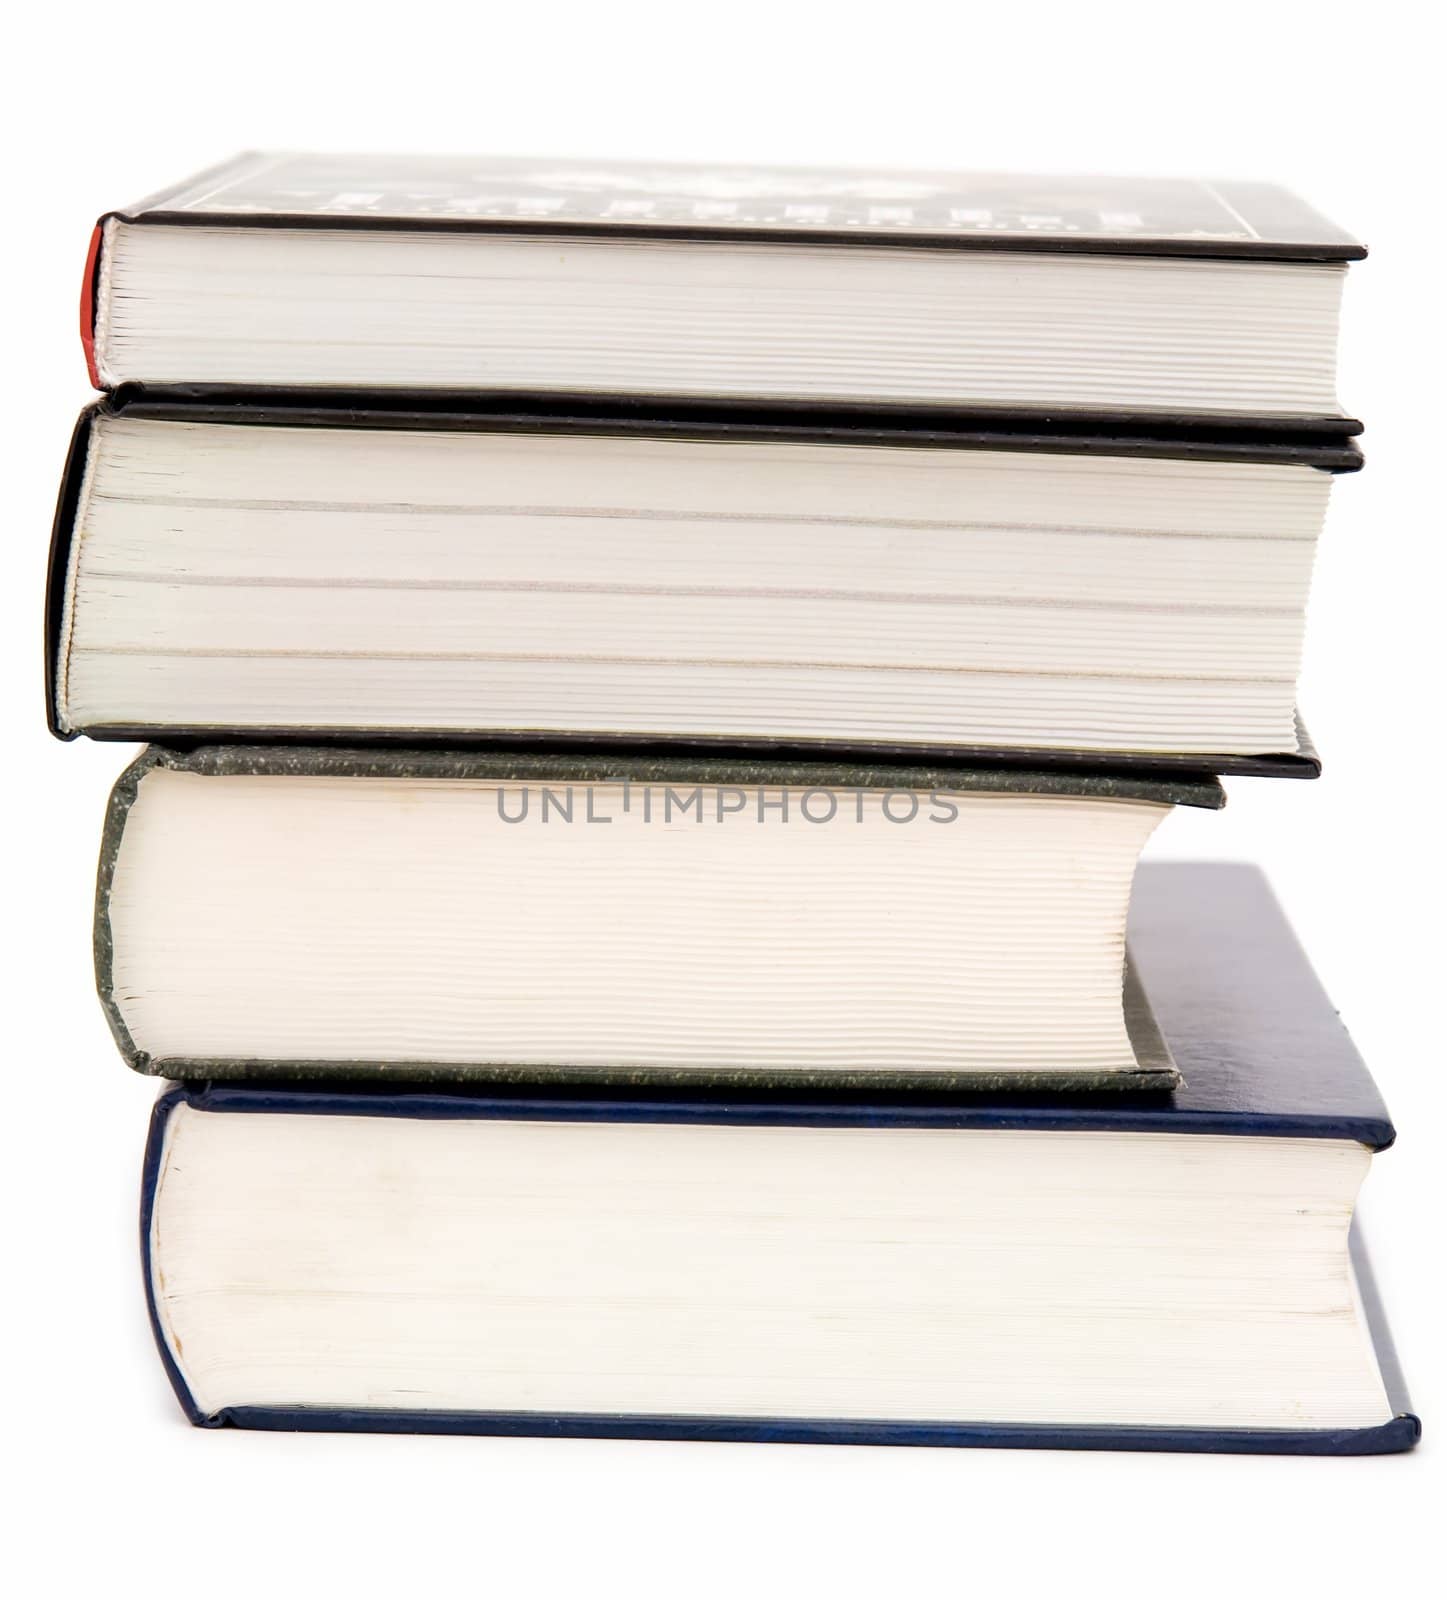 Some thick books on a white background